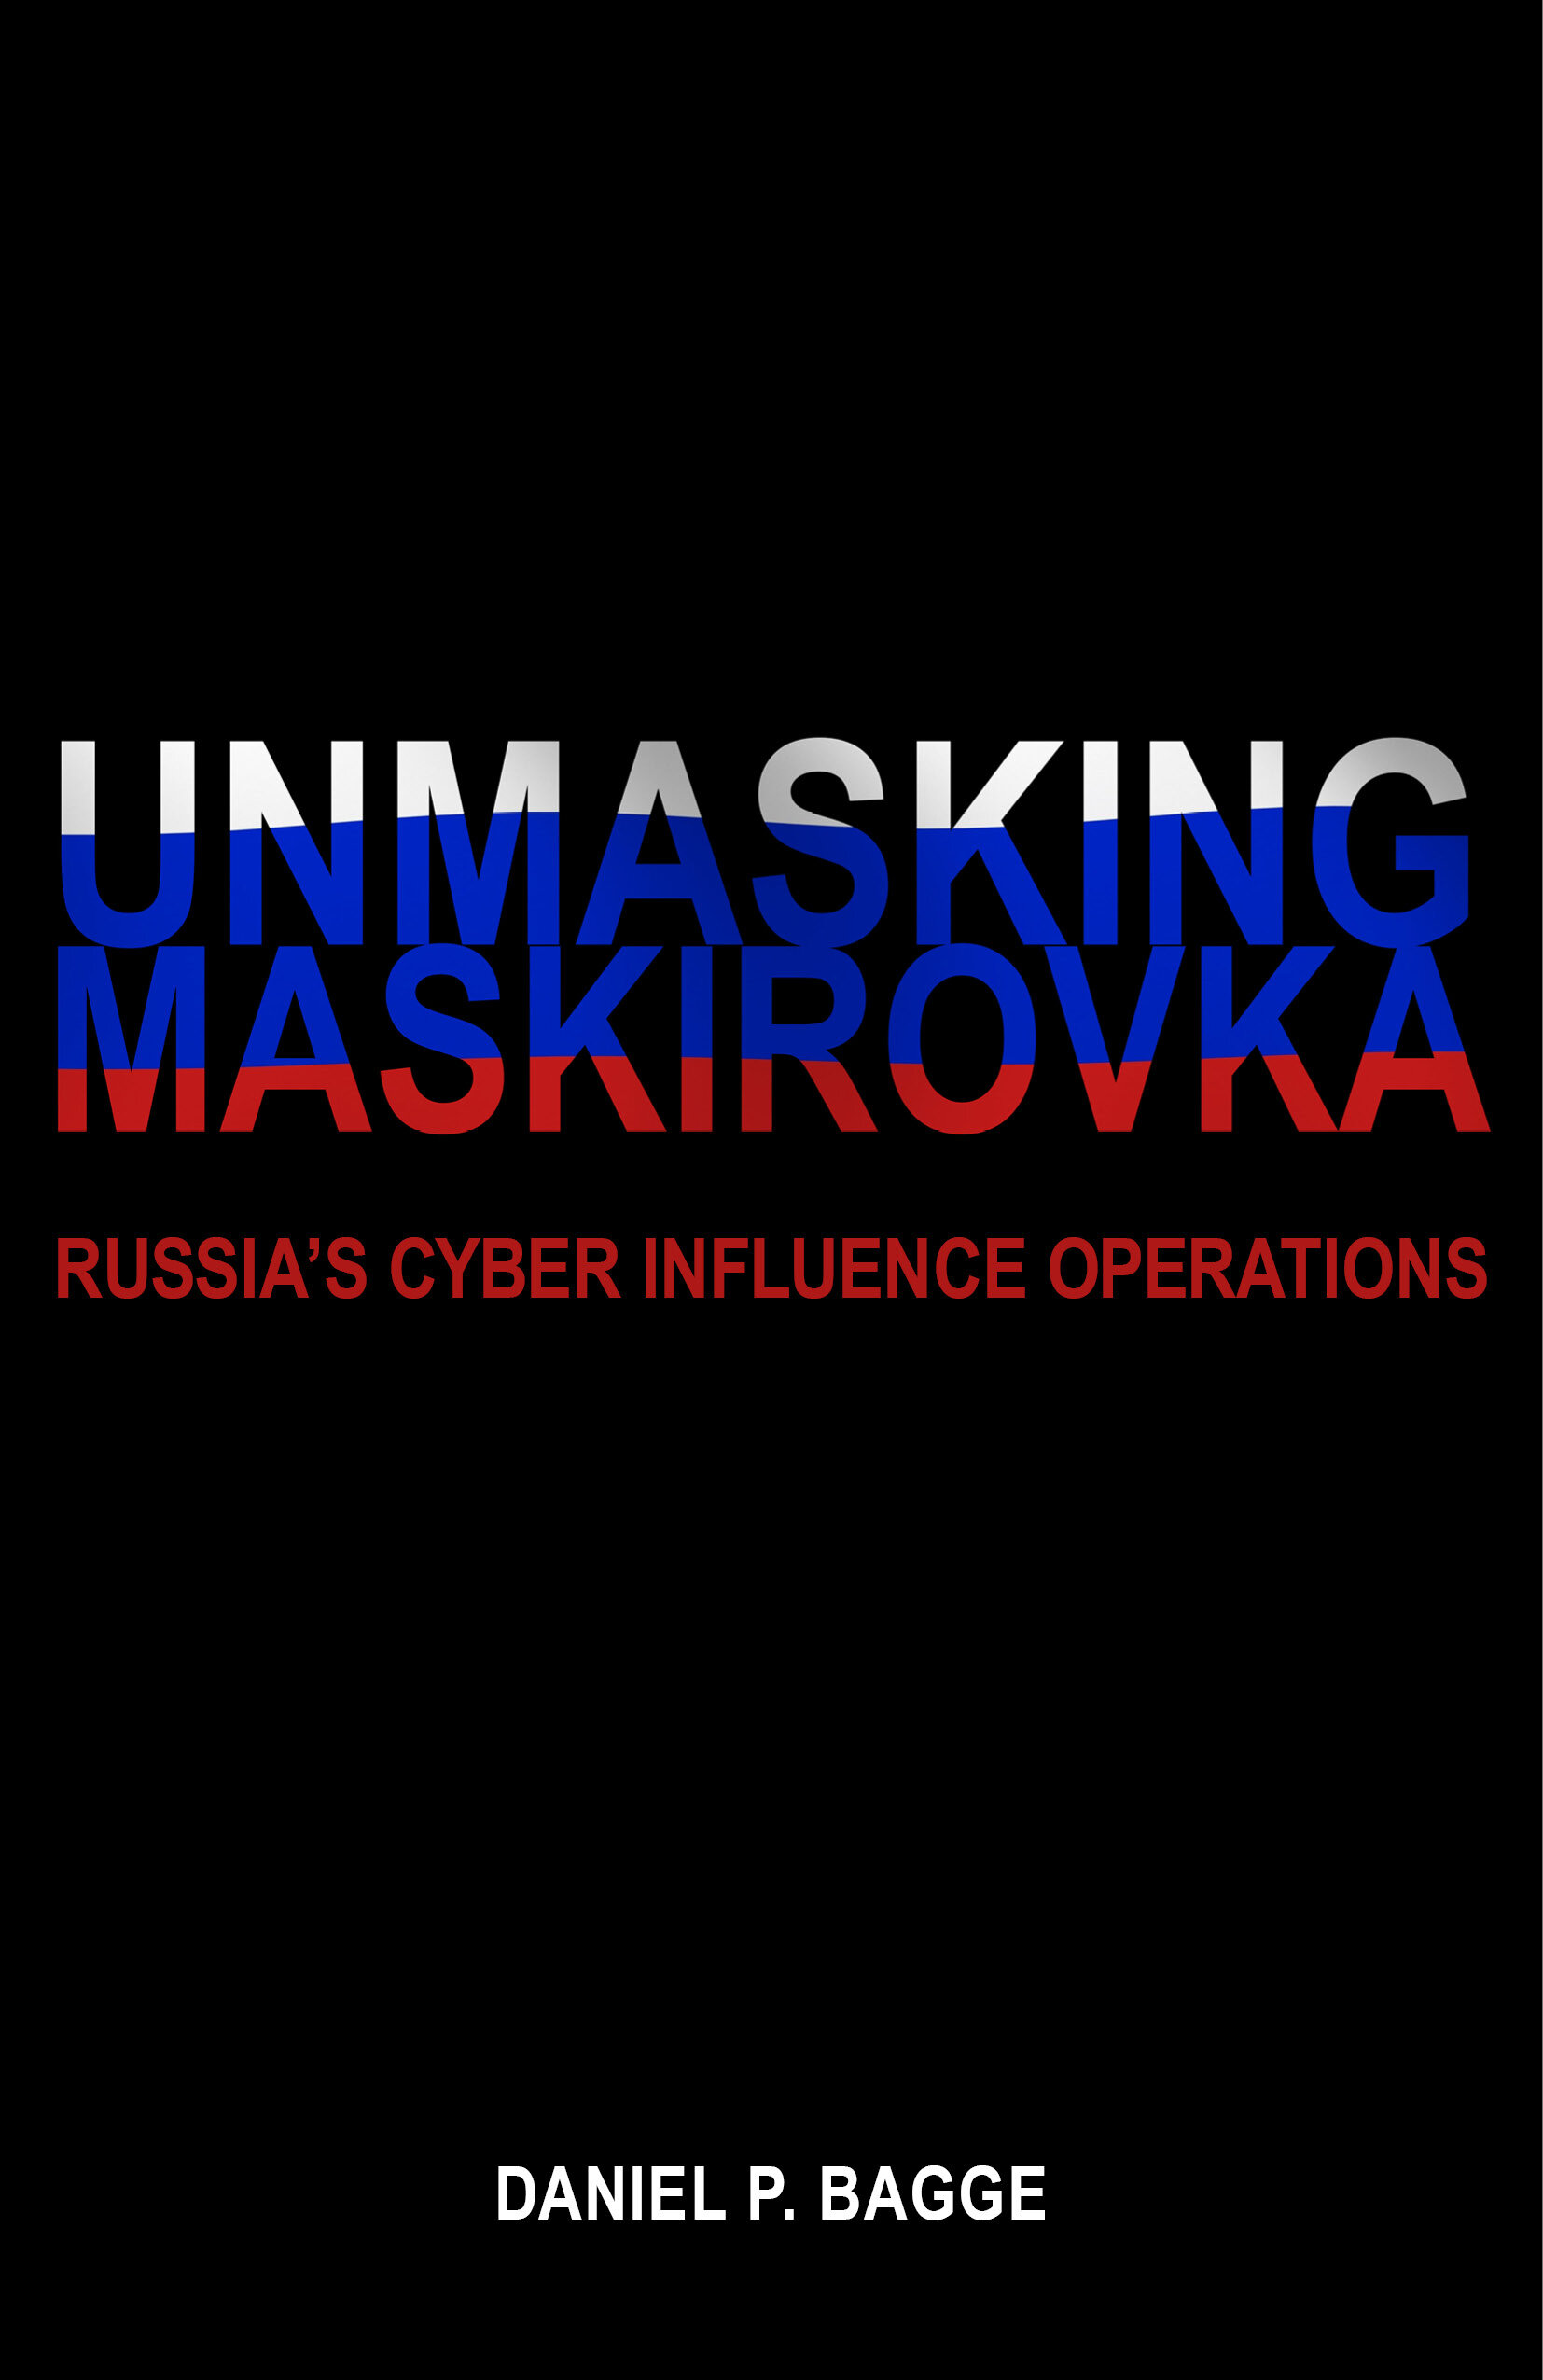 Unmasking Maskirovka by Daniel Bagge is a must-read for policy makers and strategists to gain better understanding of the capabilities and limitations in the Information Operations domain.